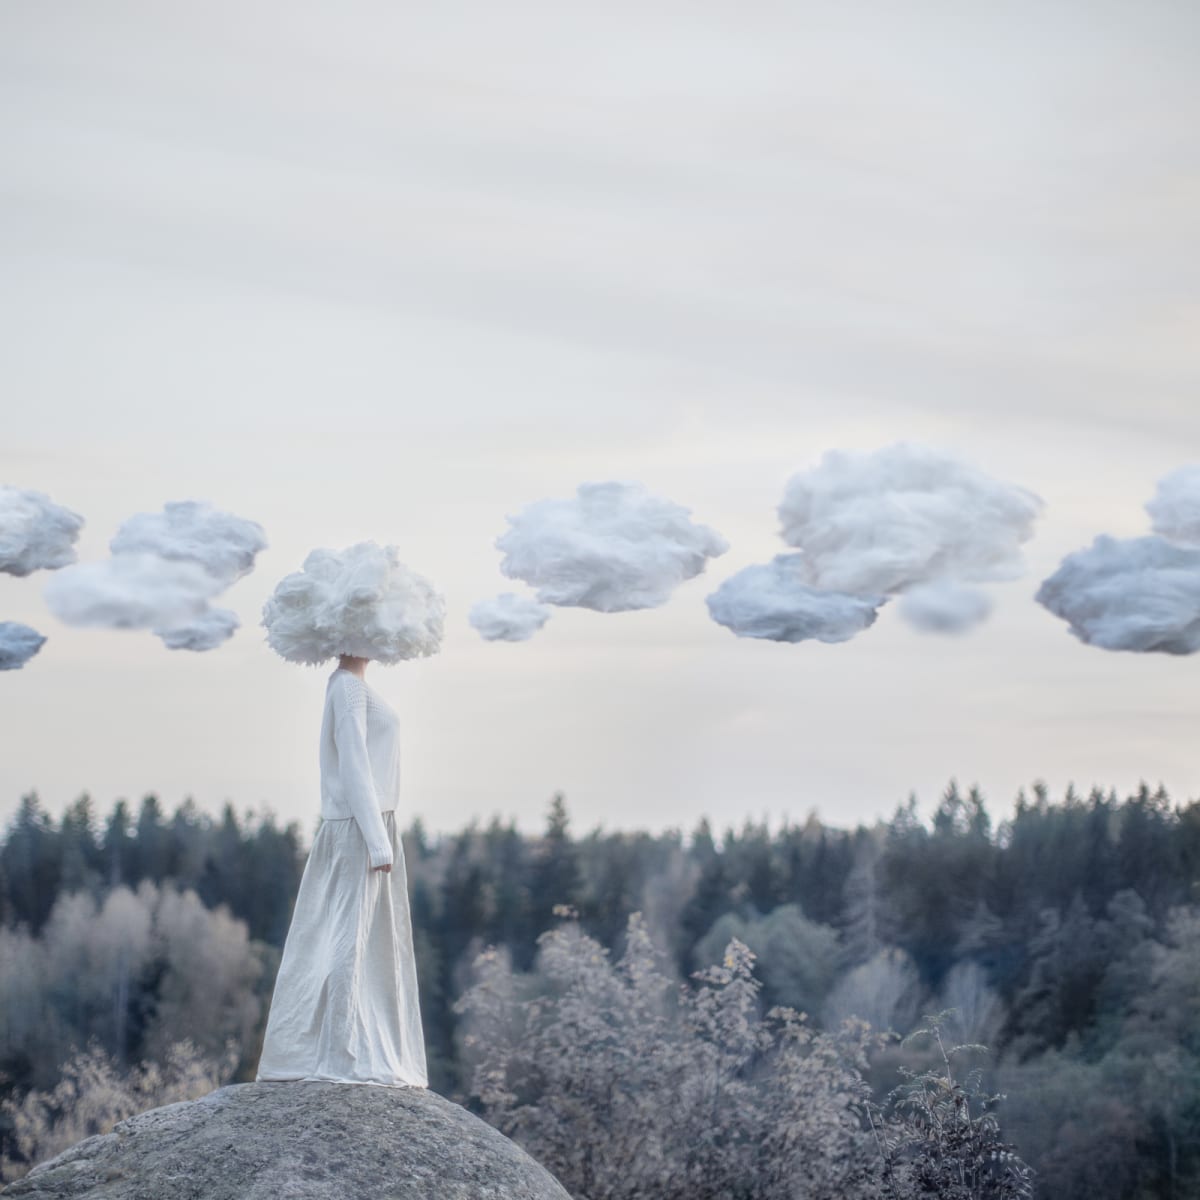 Head In The Clouds by Dasha Pears  Image: “The more clearly we can focus our attention on the wonders and realities of the universe about us, the less taste we shall have for destruction.”

― Rachel Carson